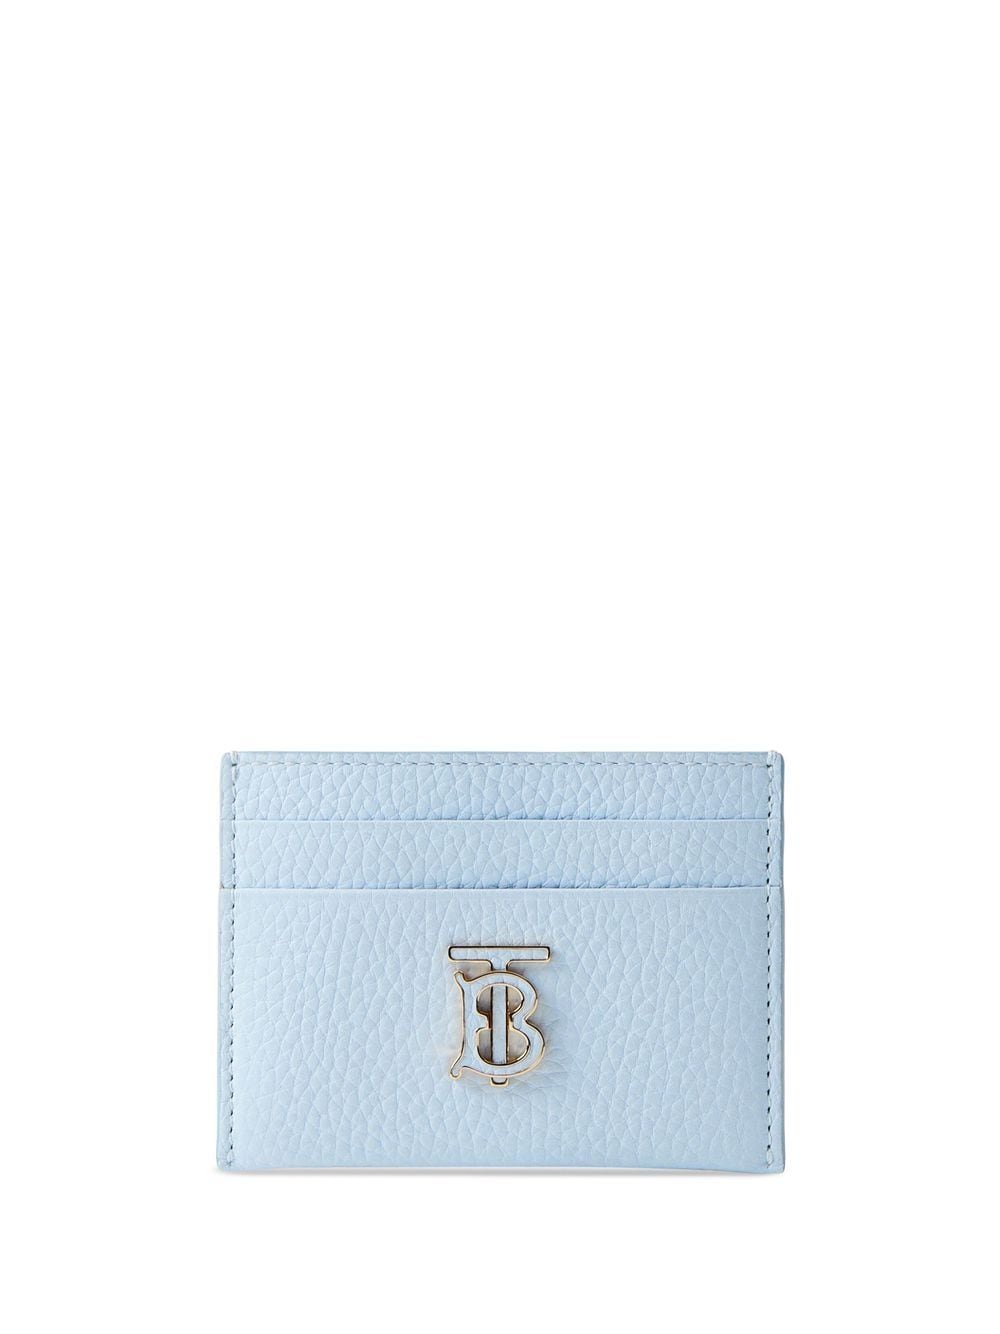 Burberry Tb Textured-leather Cardholder In Blau